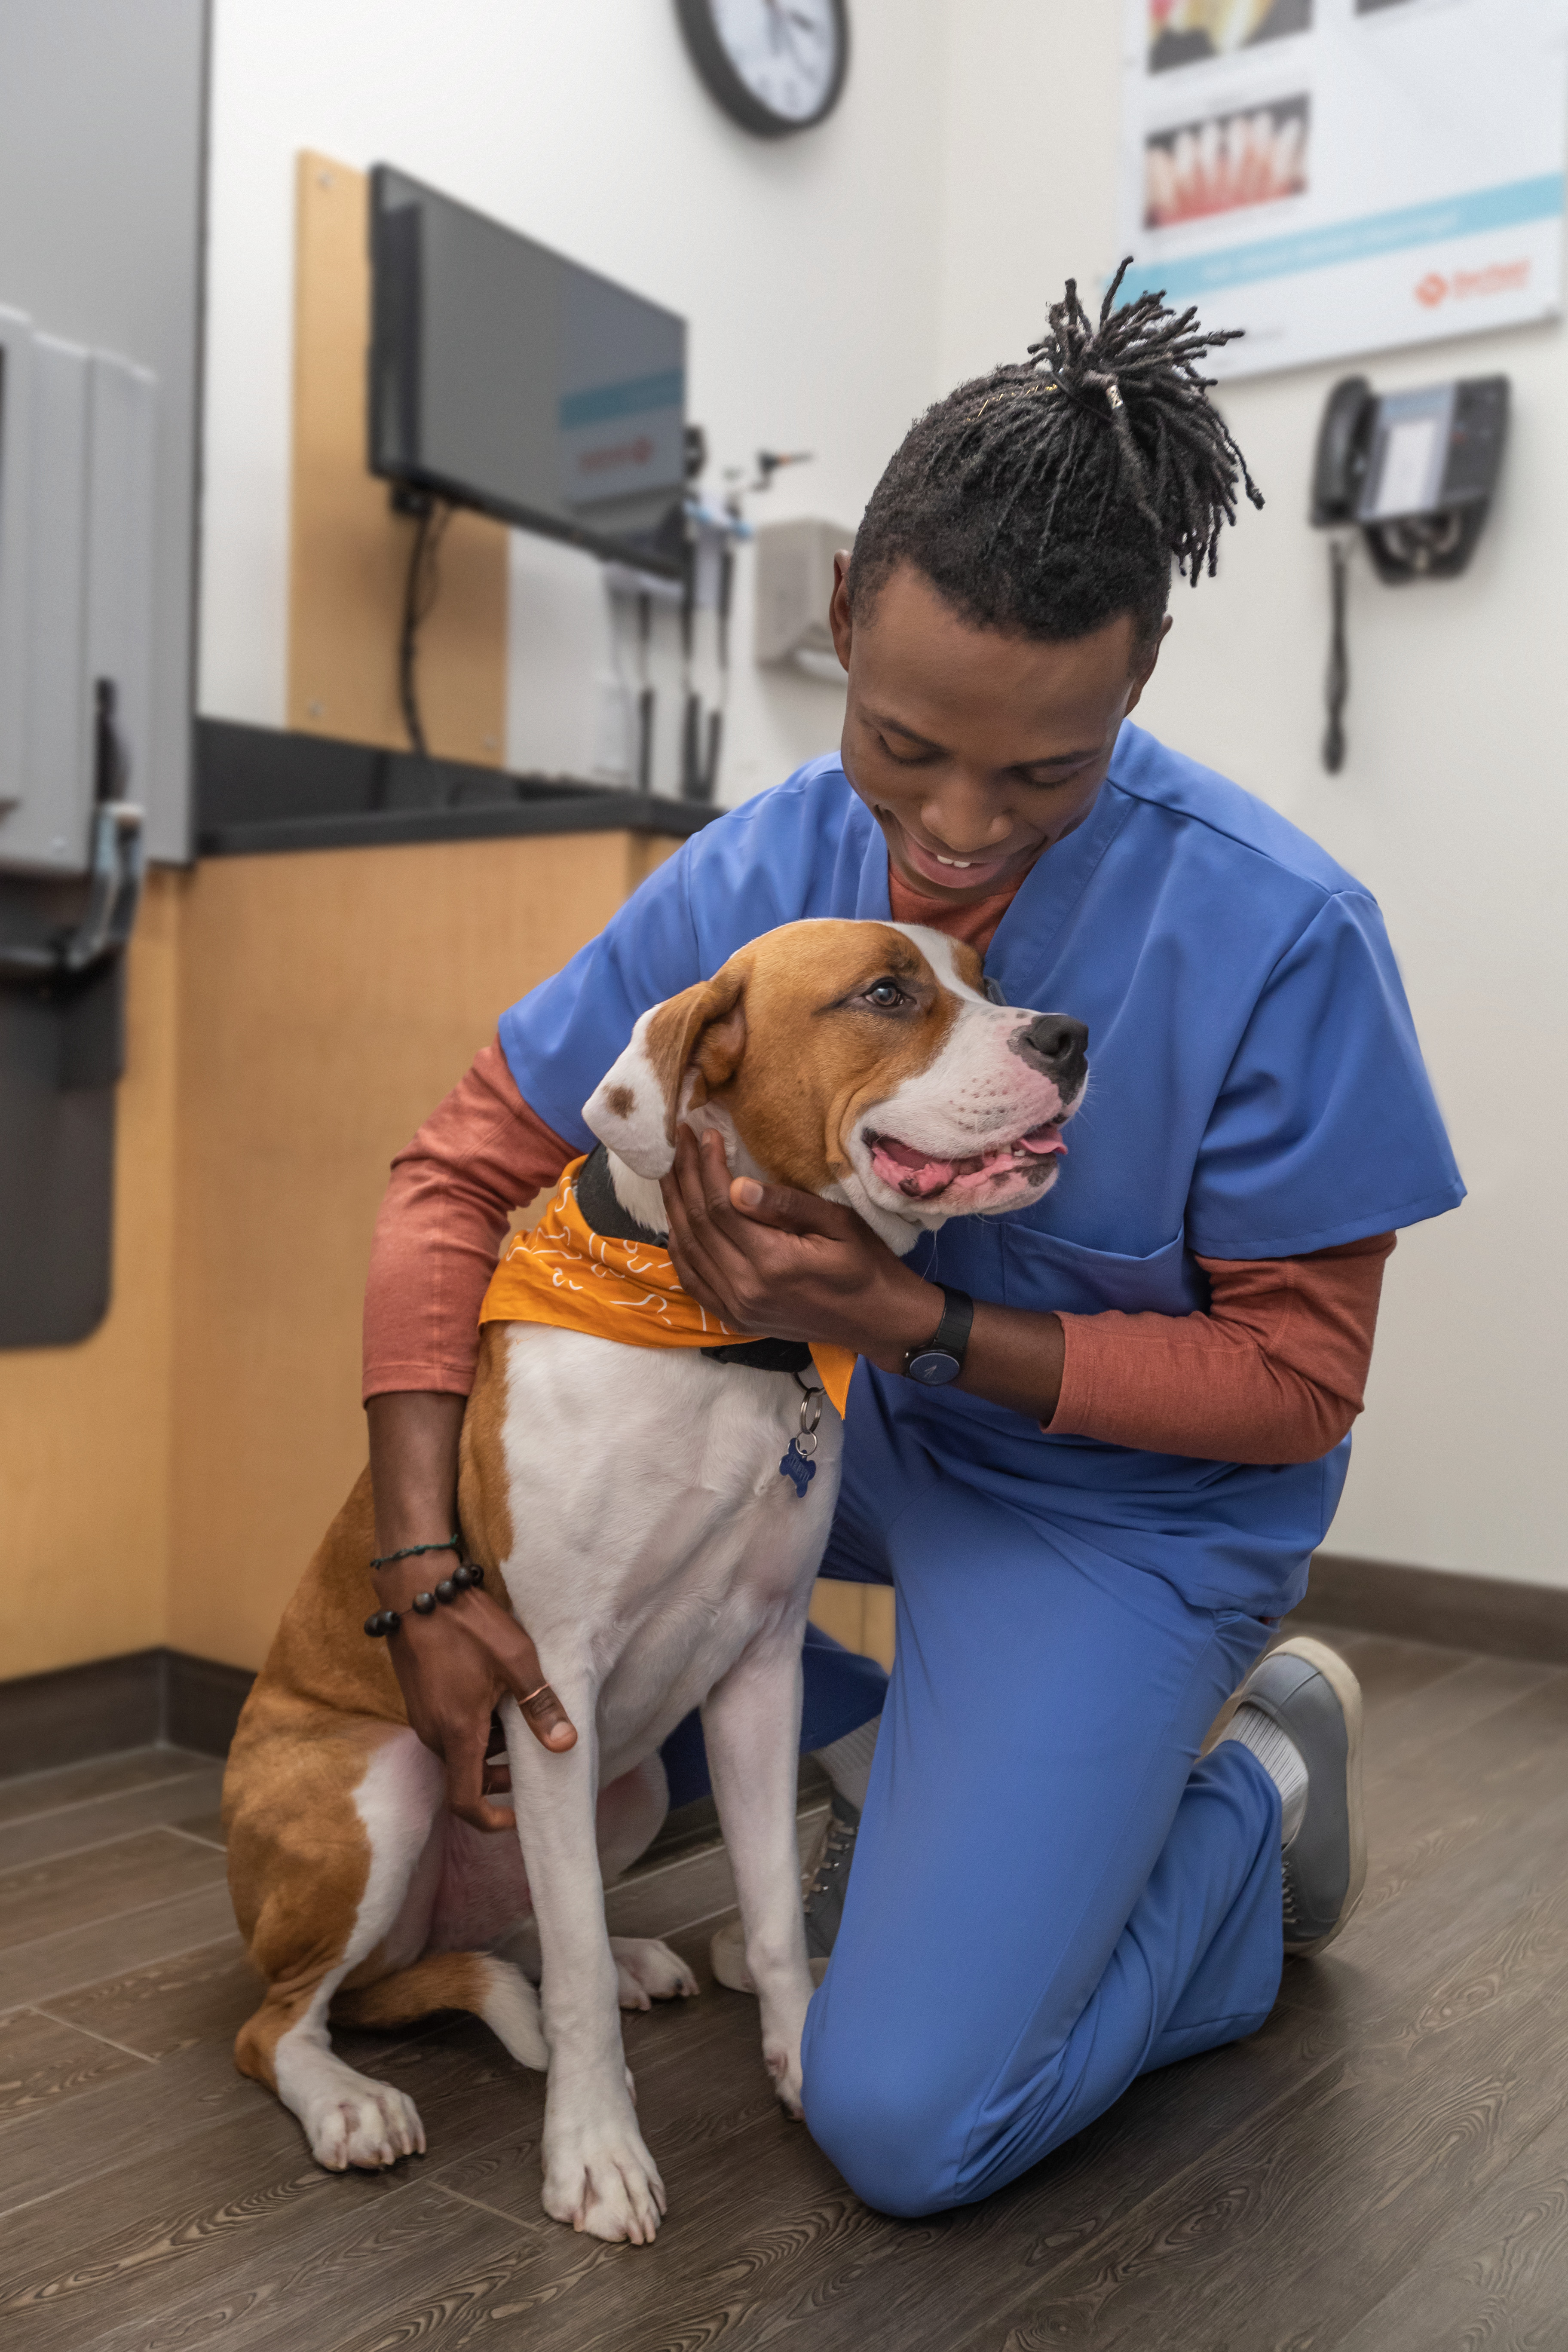 The 4 I’s of quality improvement in veterinary medicine